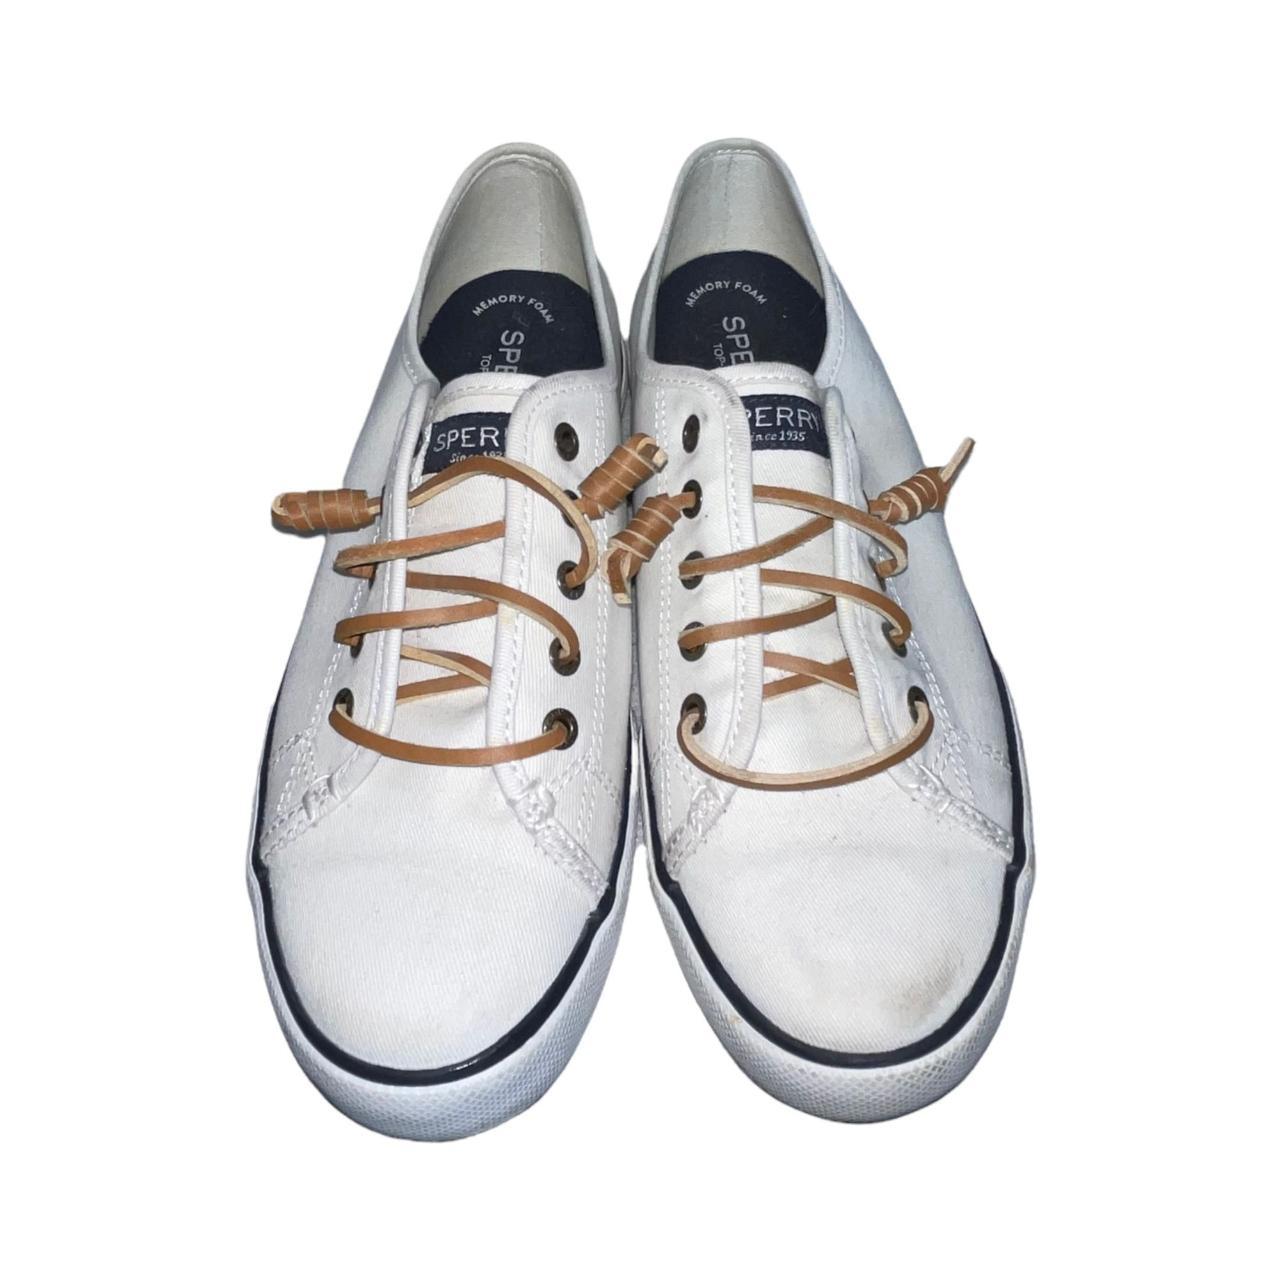 Women's White and Blue Loafers (2)